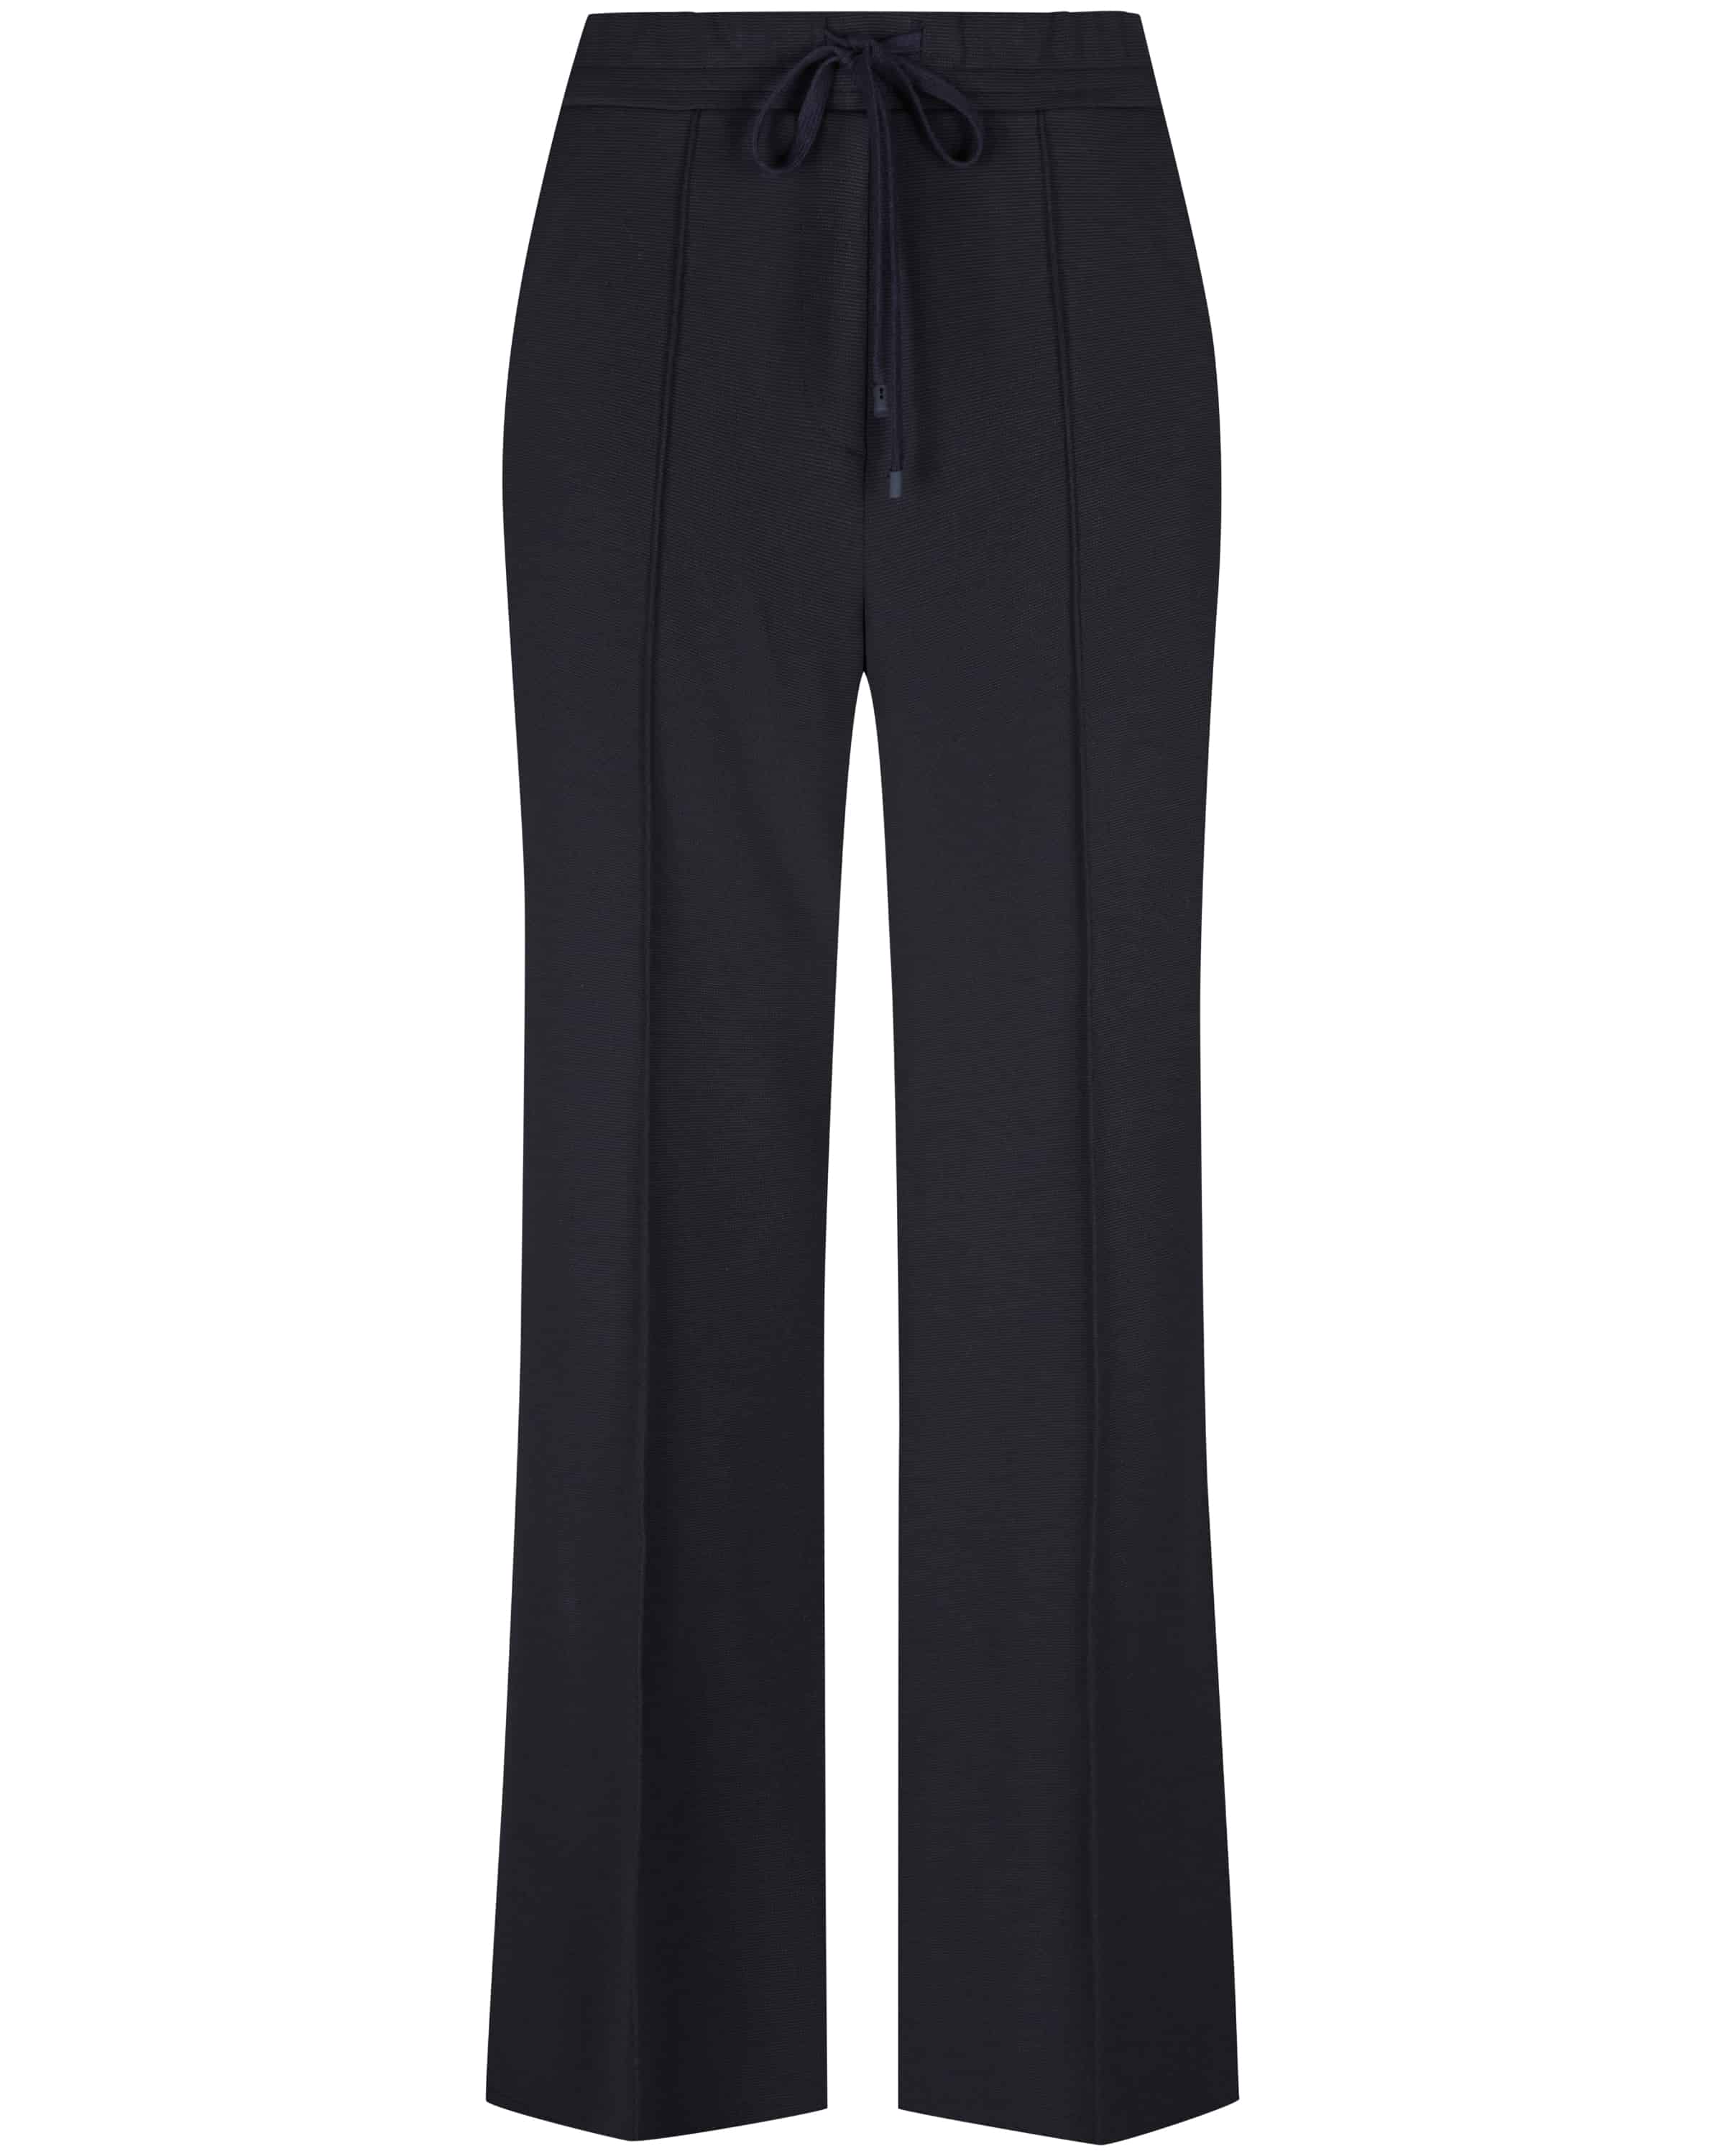 CAMBIO AVRIL WIDE LEG PANT WITH DRAWSTRING